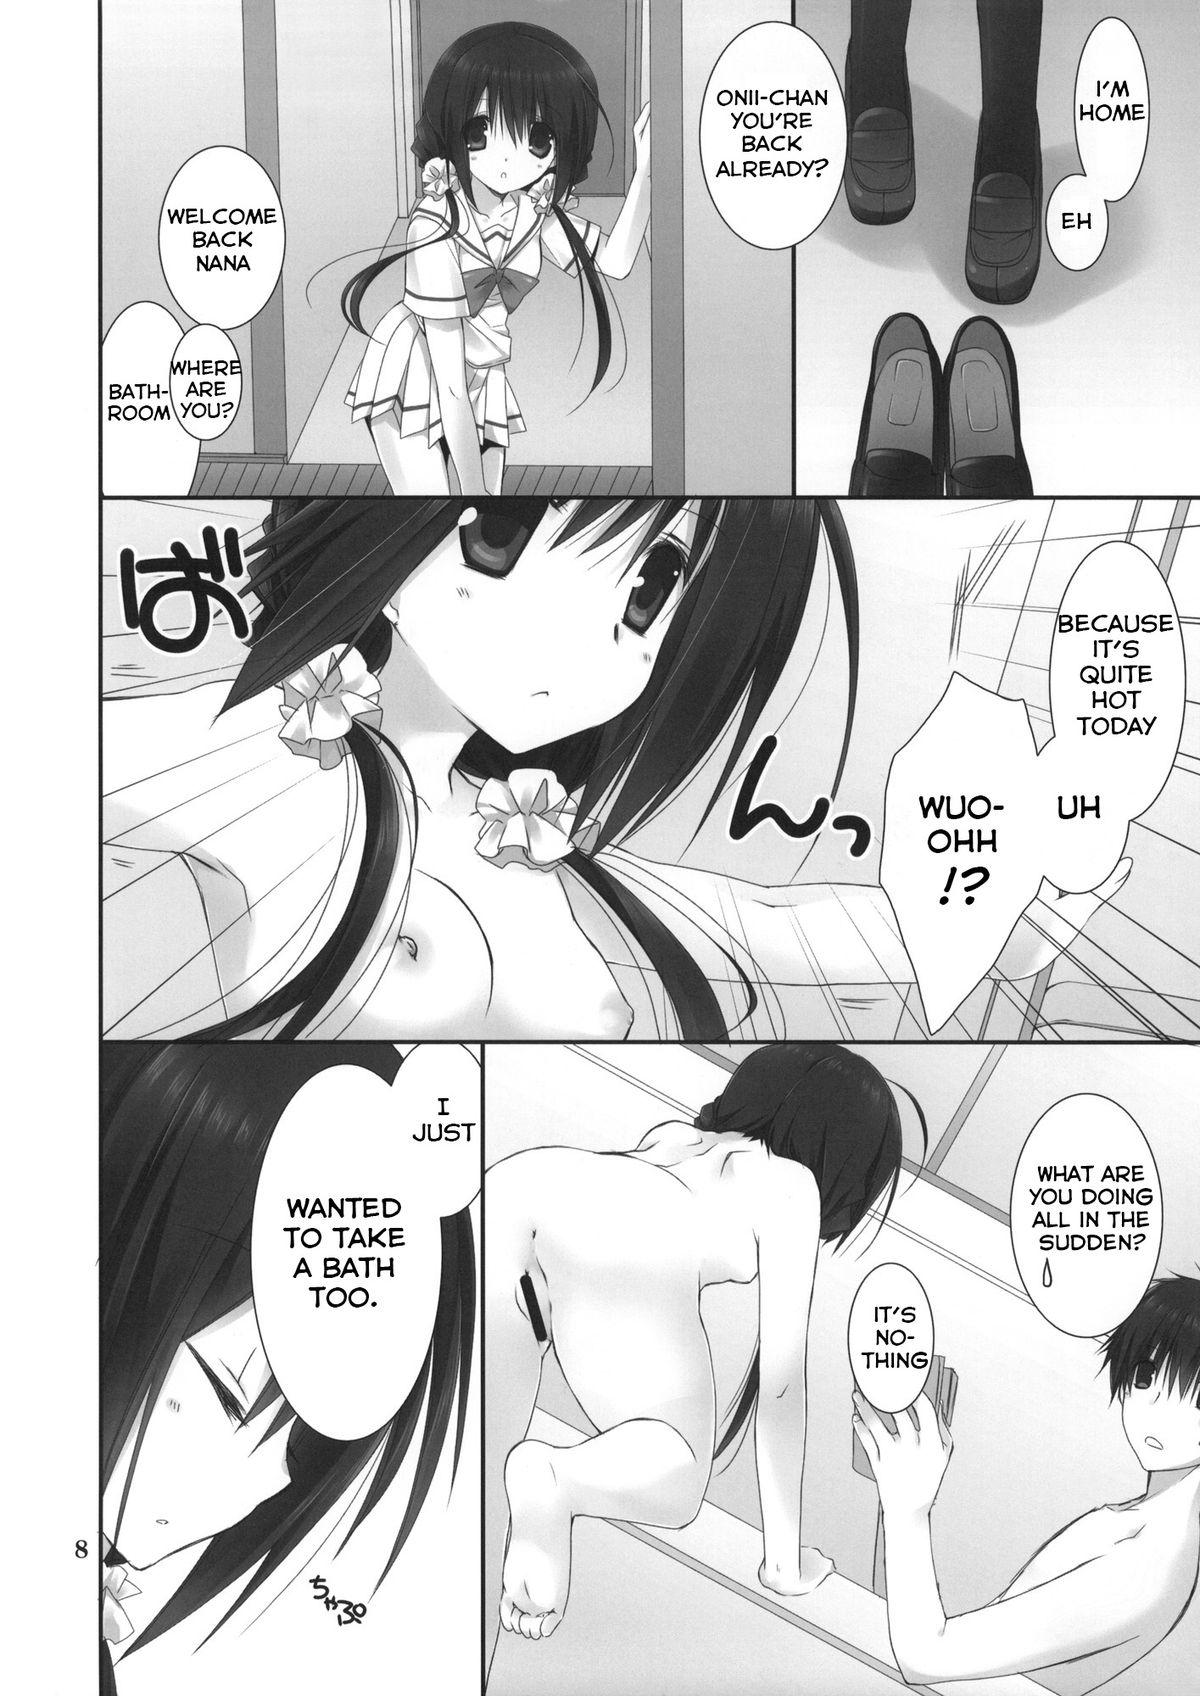 Pigtails Imouto no Otetsudai 4 | Little Sister Helper 4 Tall - Page 7